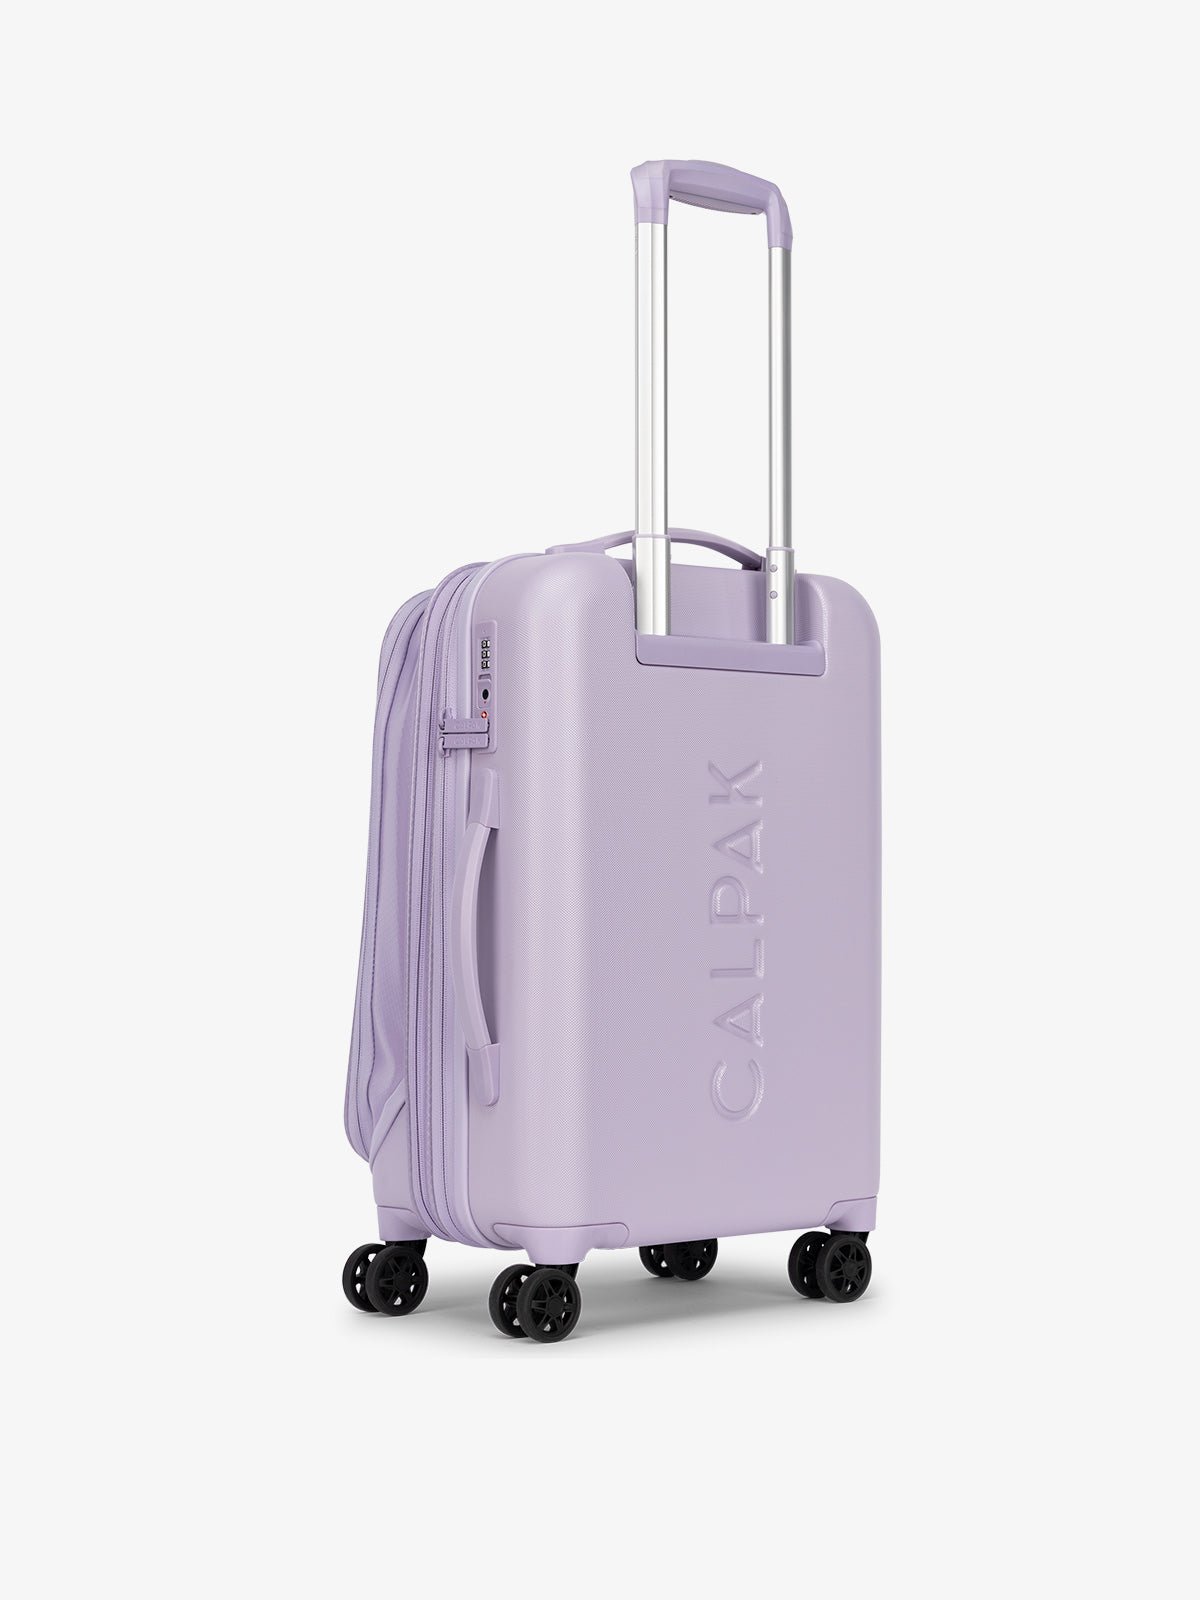 CALPAK Terra Carry-On Luggage hard shell back view with 360 spinner wheels and grab handles in light purple